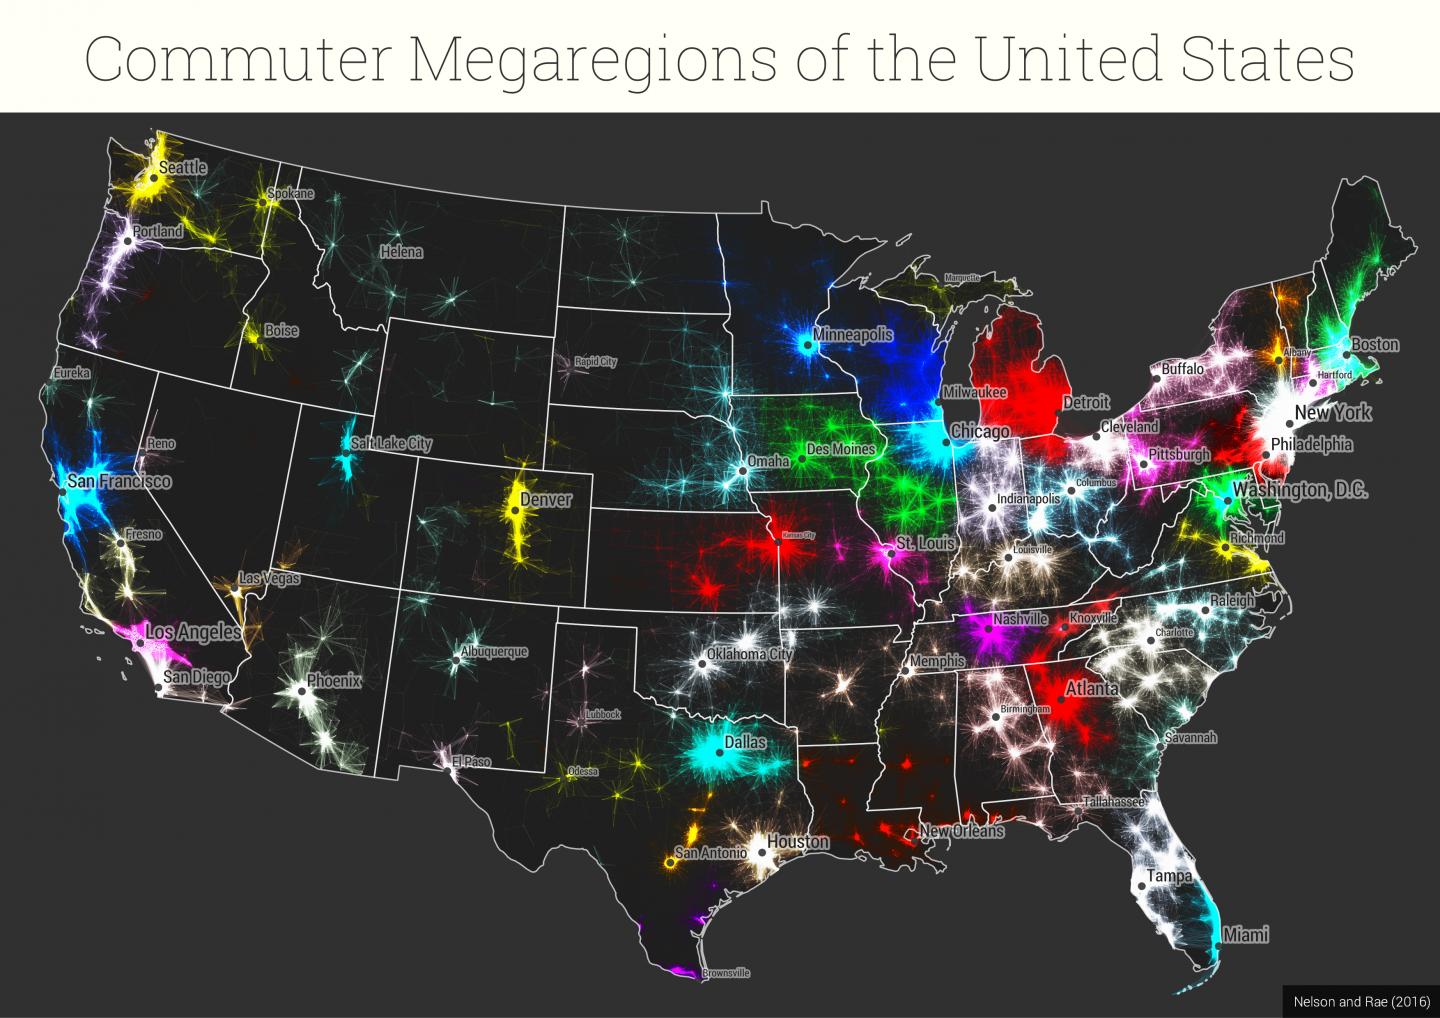 Commuter Megaregions of the United States